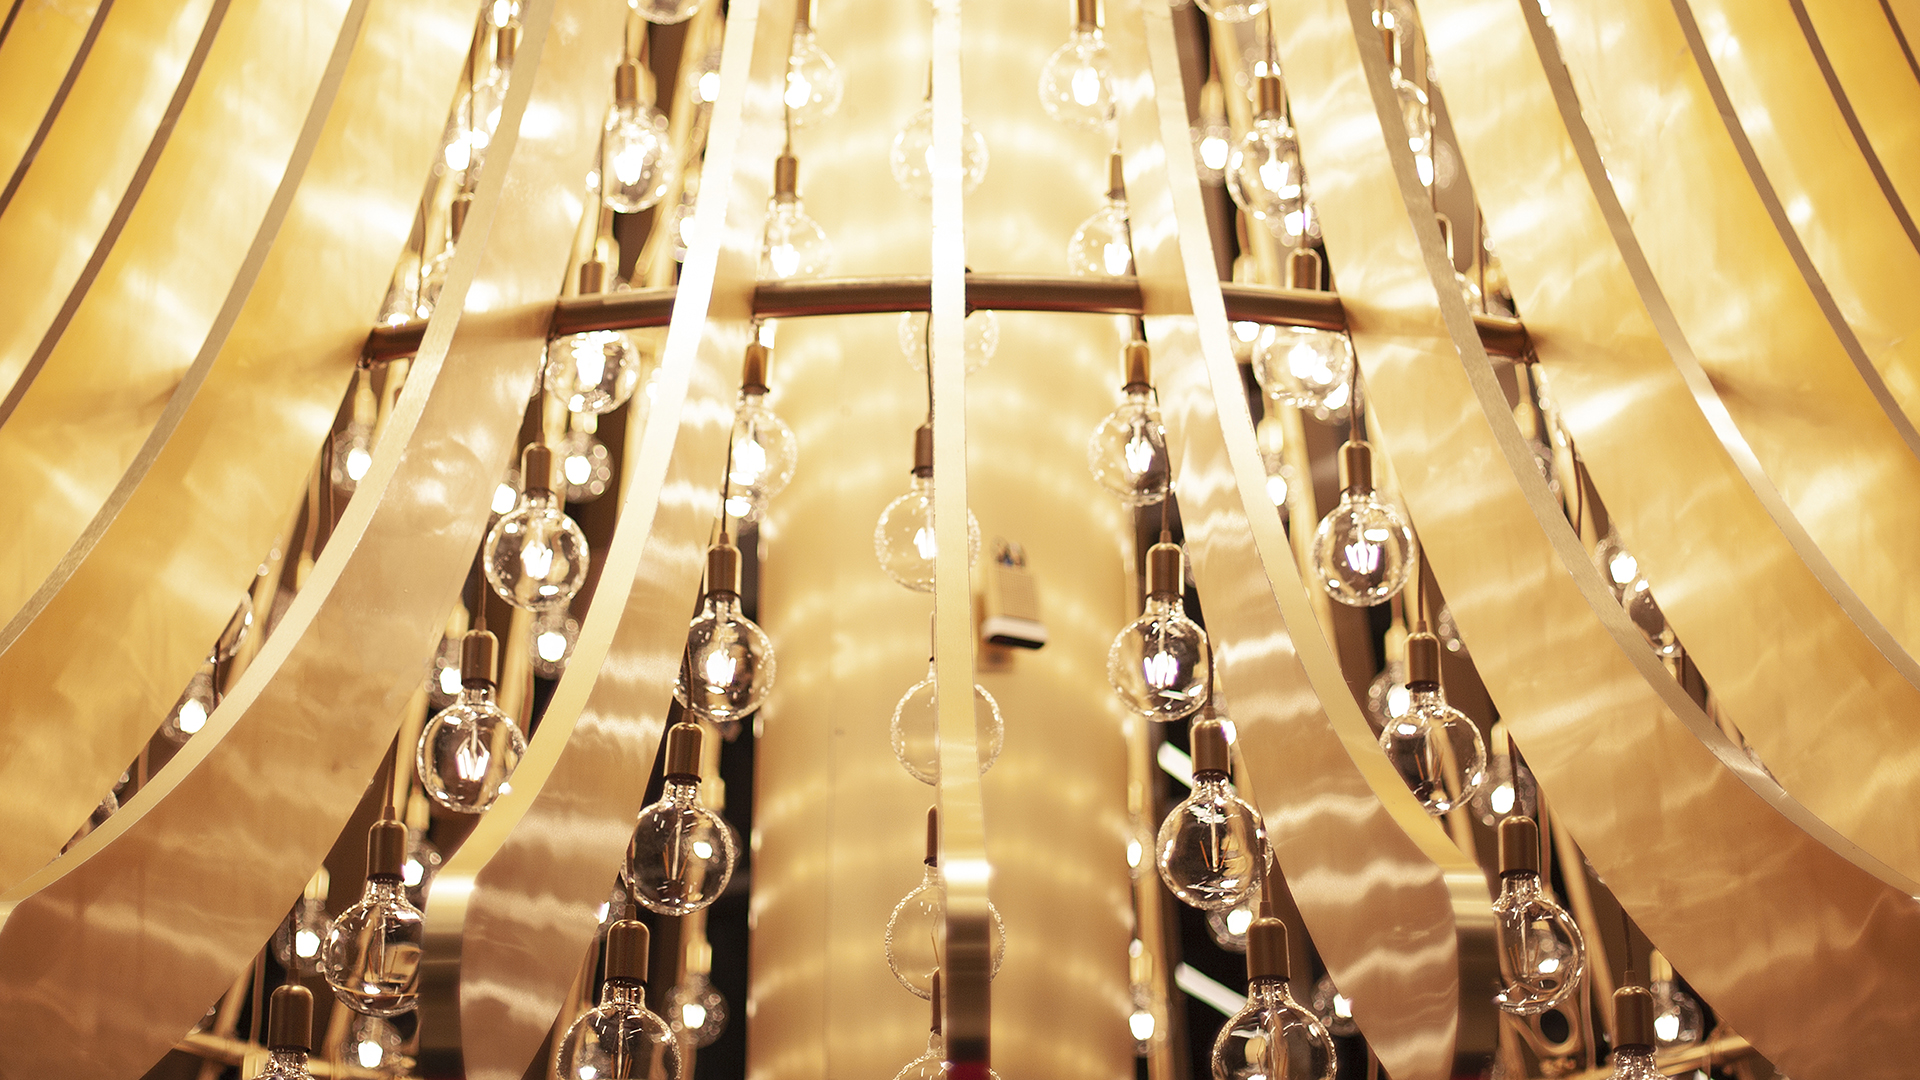 Several gold arms create a bell-like structure with addressable light bulbs hanging from each arm